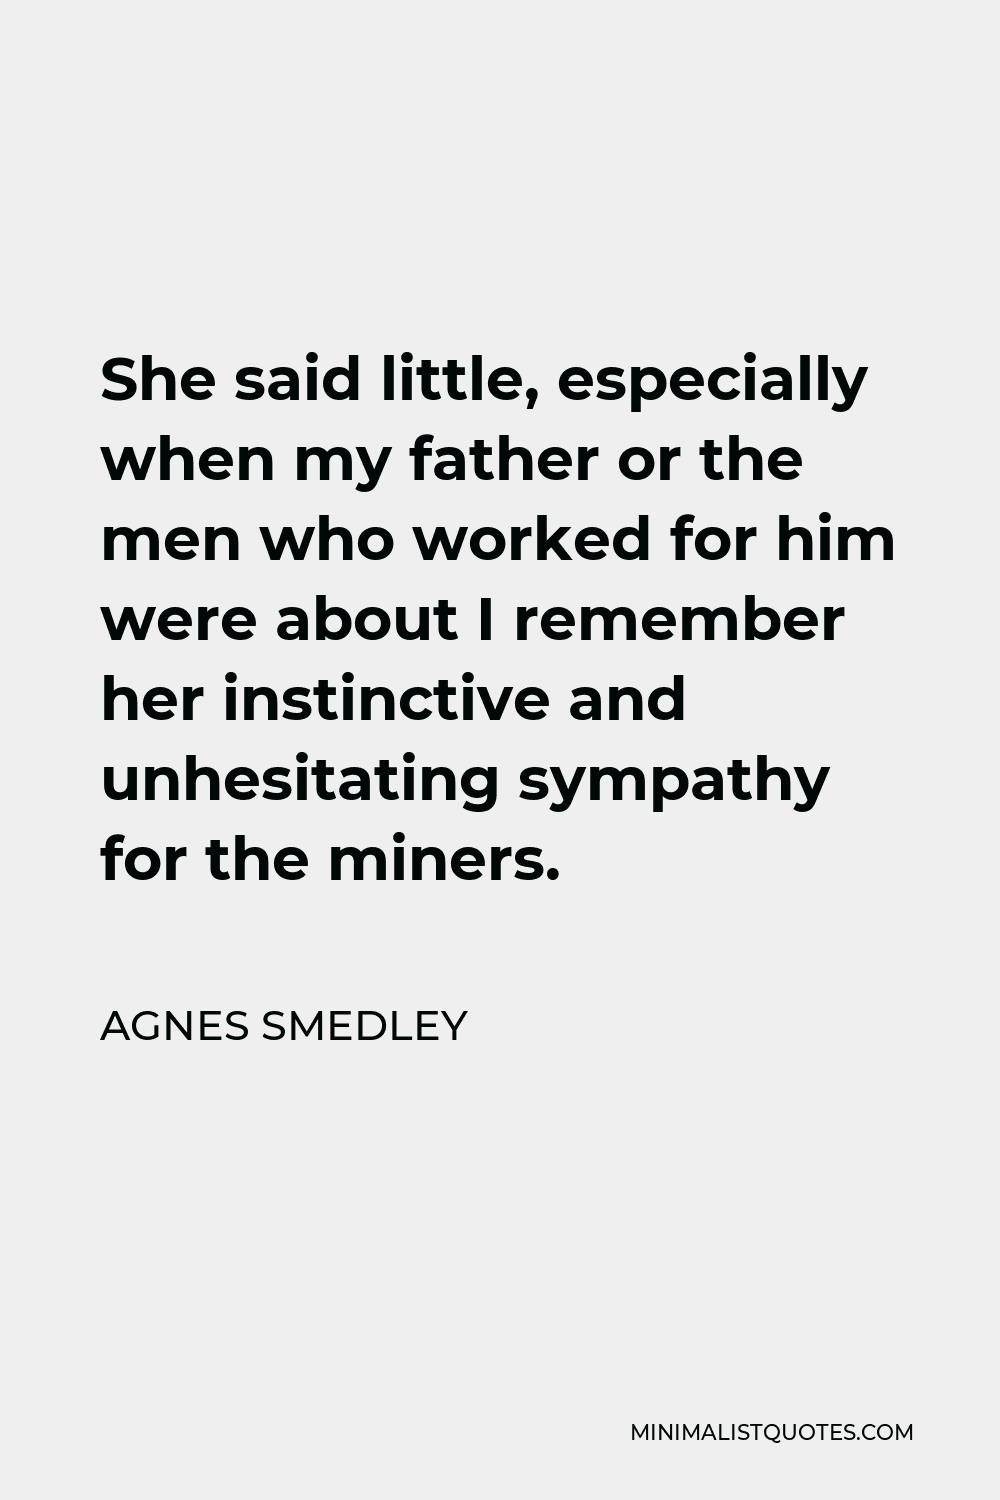 Agnes Smedley Quote - She said little, especially when my father or the men who worked for him were about I remember her instinctive and unhesitating sympathy for the miners.